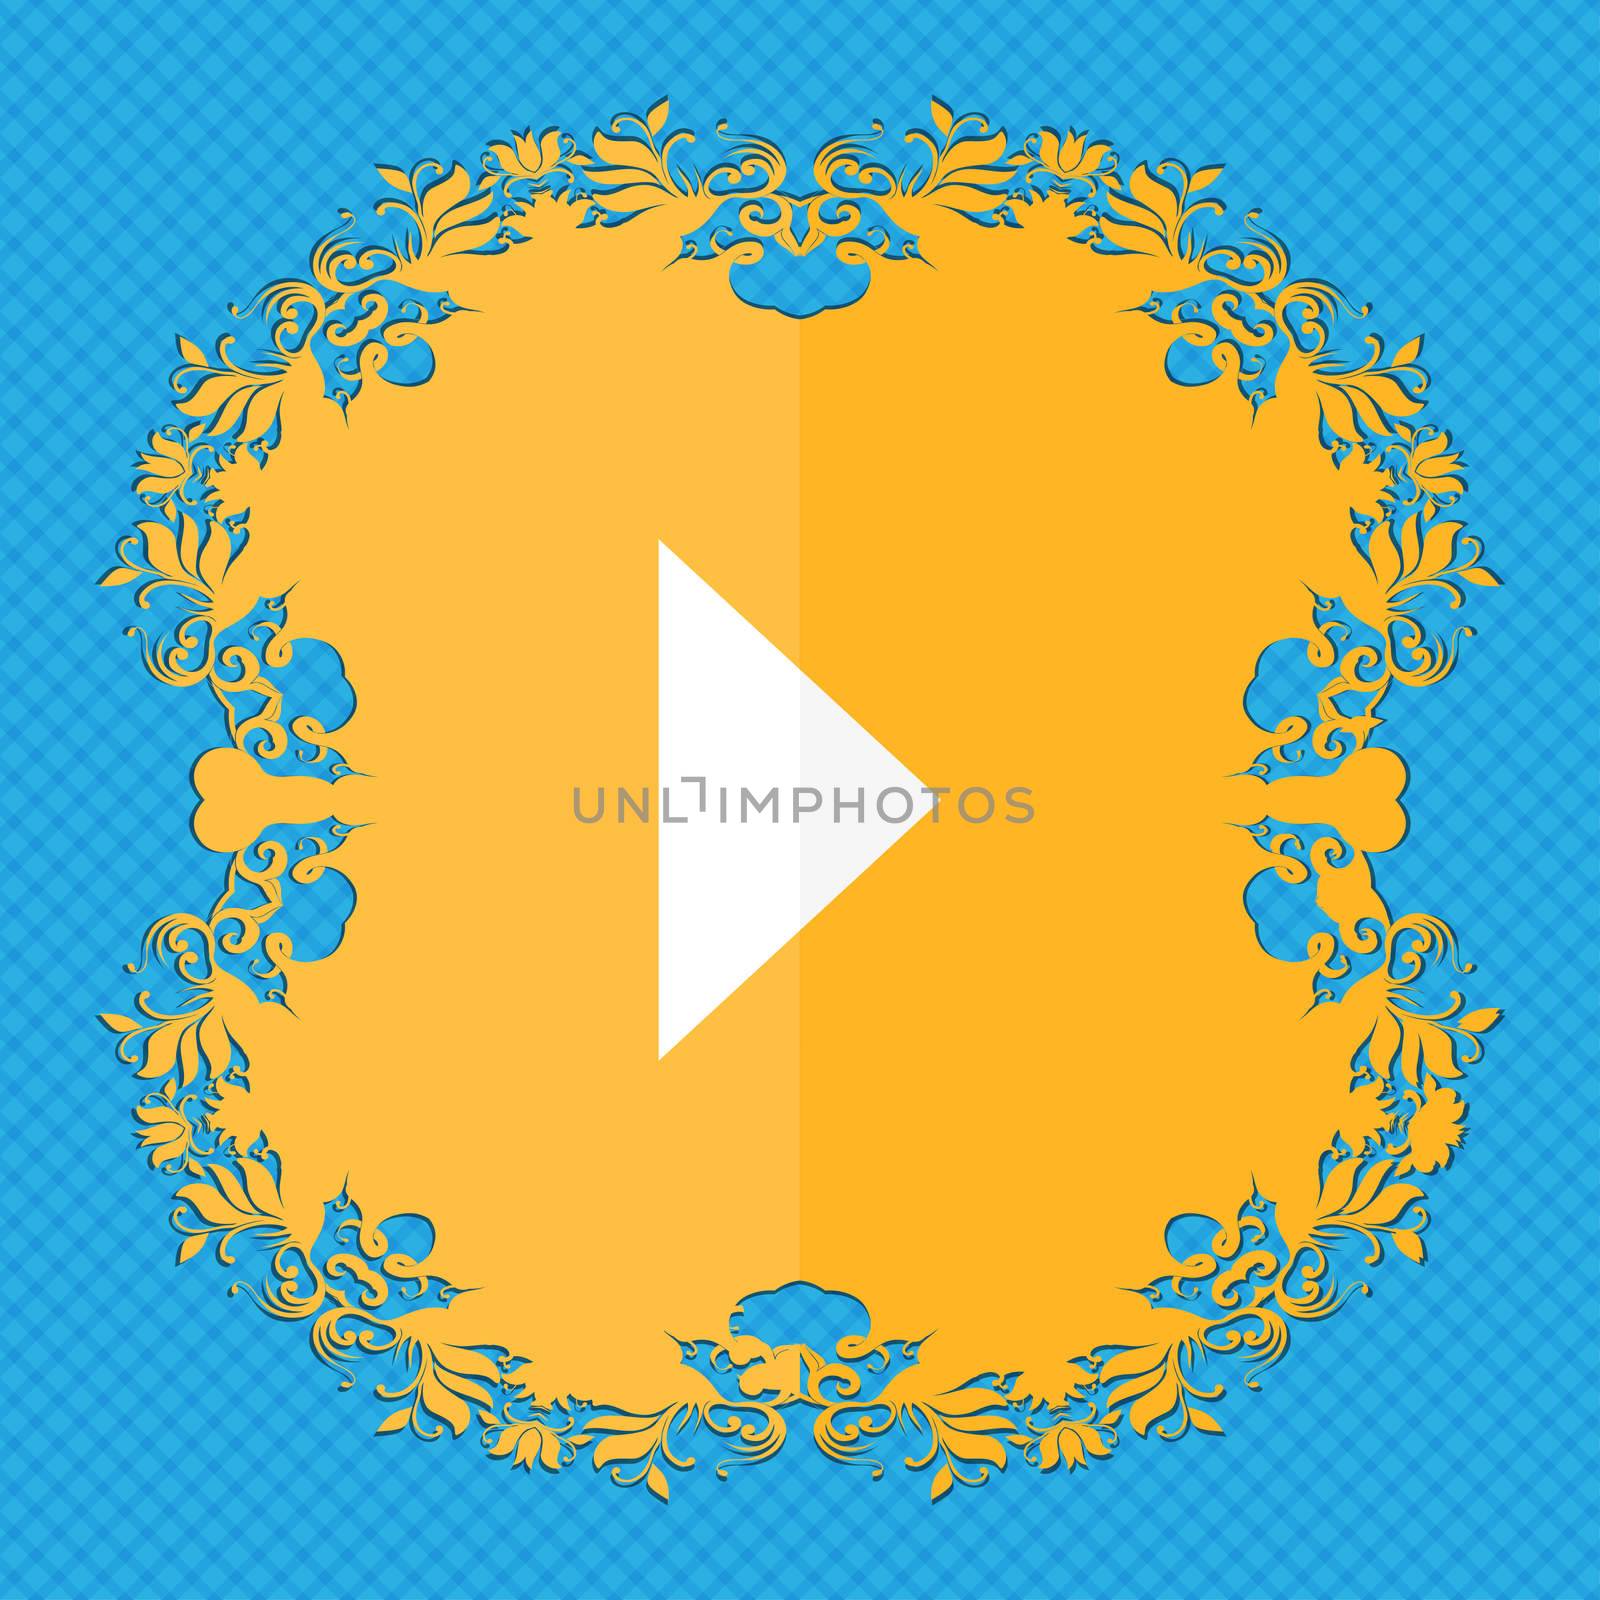 play button . Floral flat design on a blue abstract background with place for your text. illustration